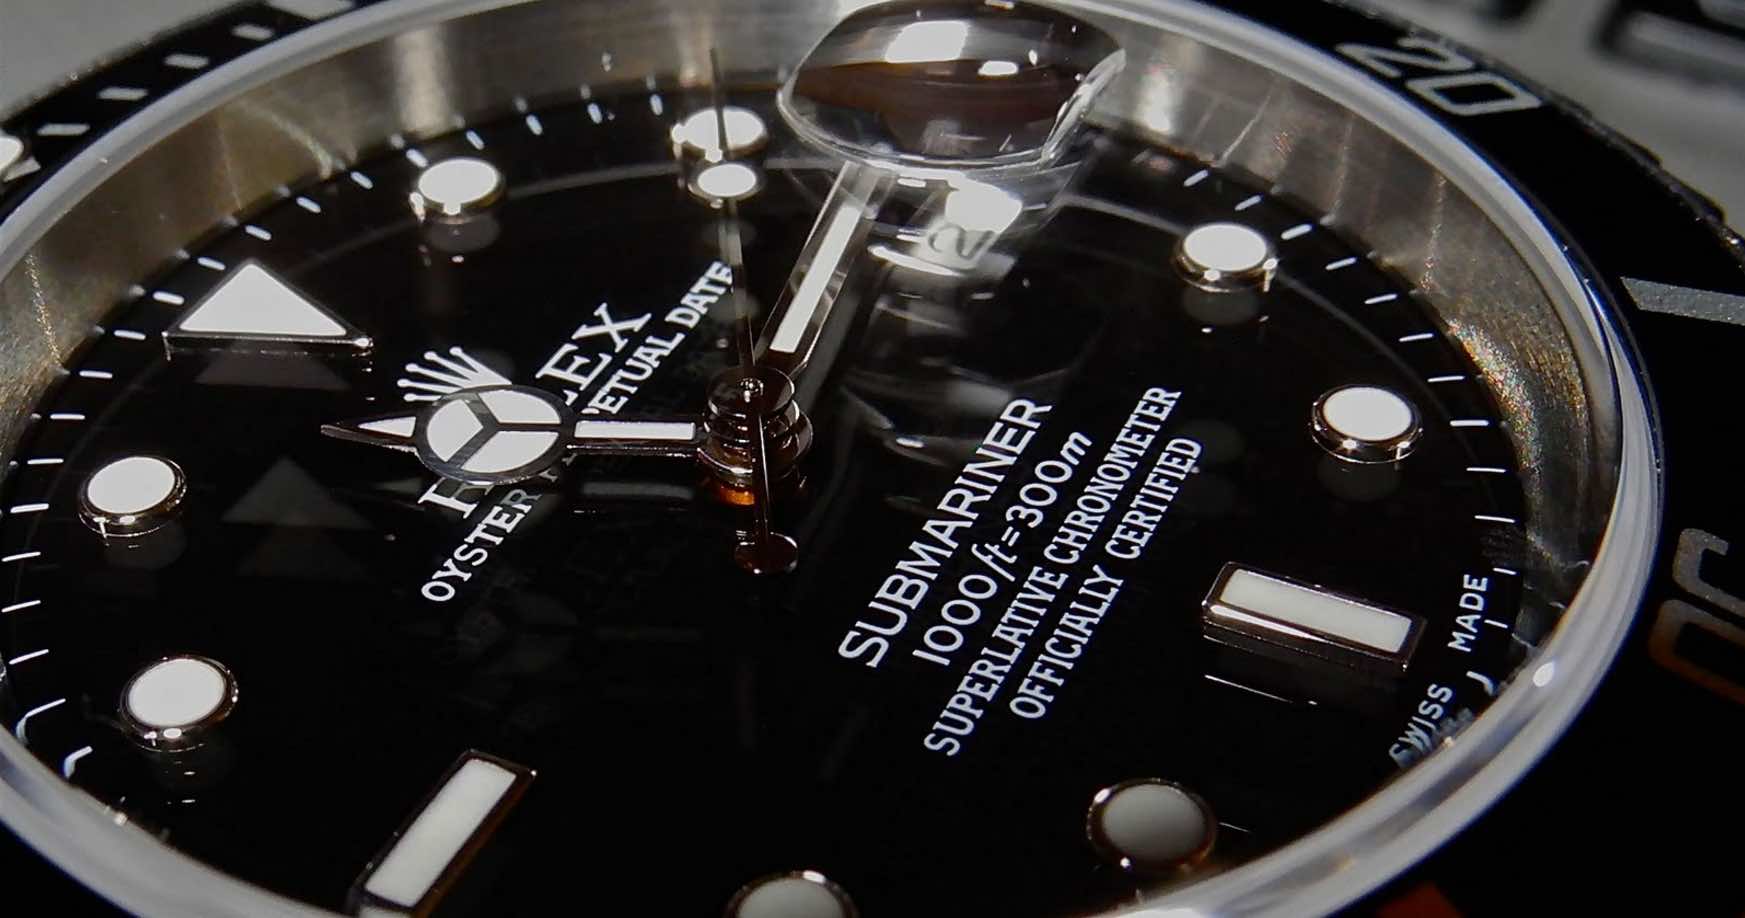 Photonic Swiss Watch Engraving To Sort Fake From Genuine_Image 0